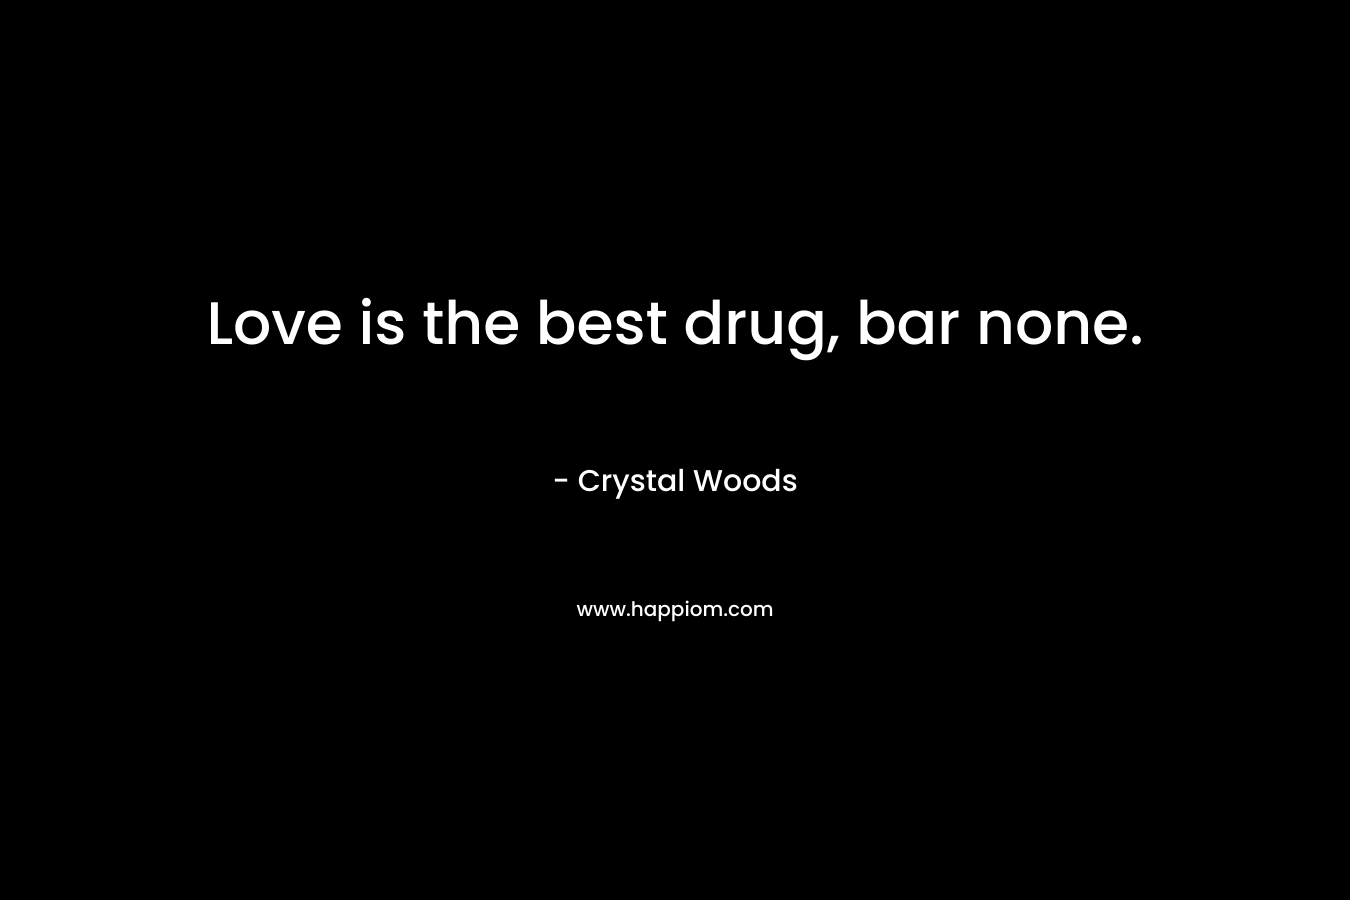 Love is the best drug, bar none. – Crystal Woods